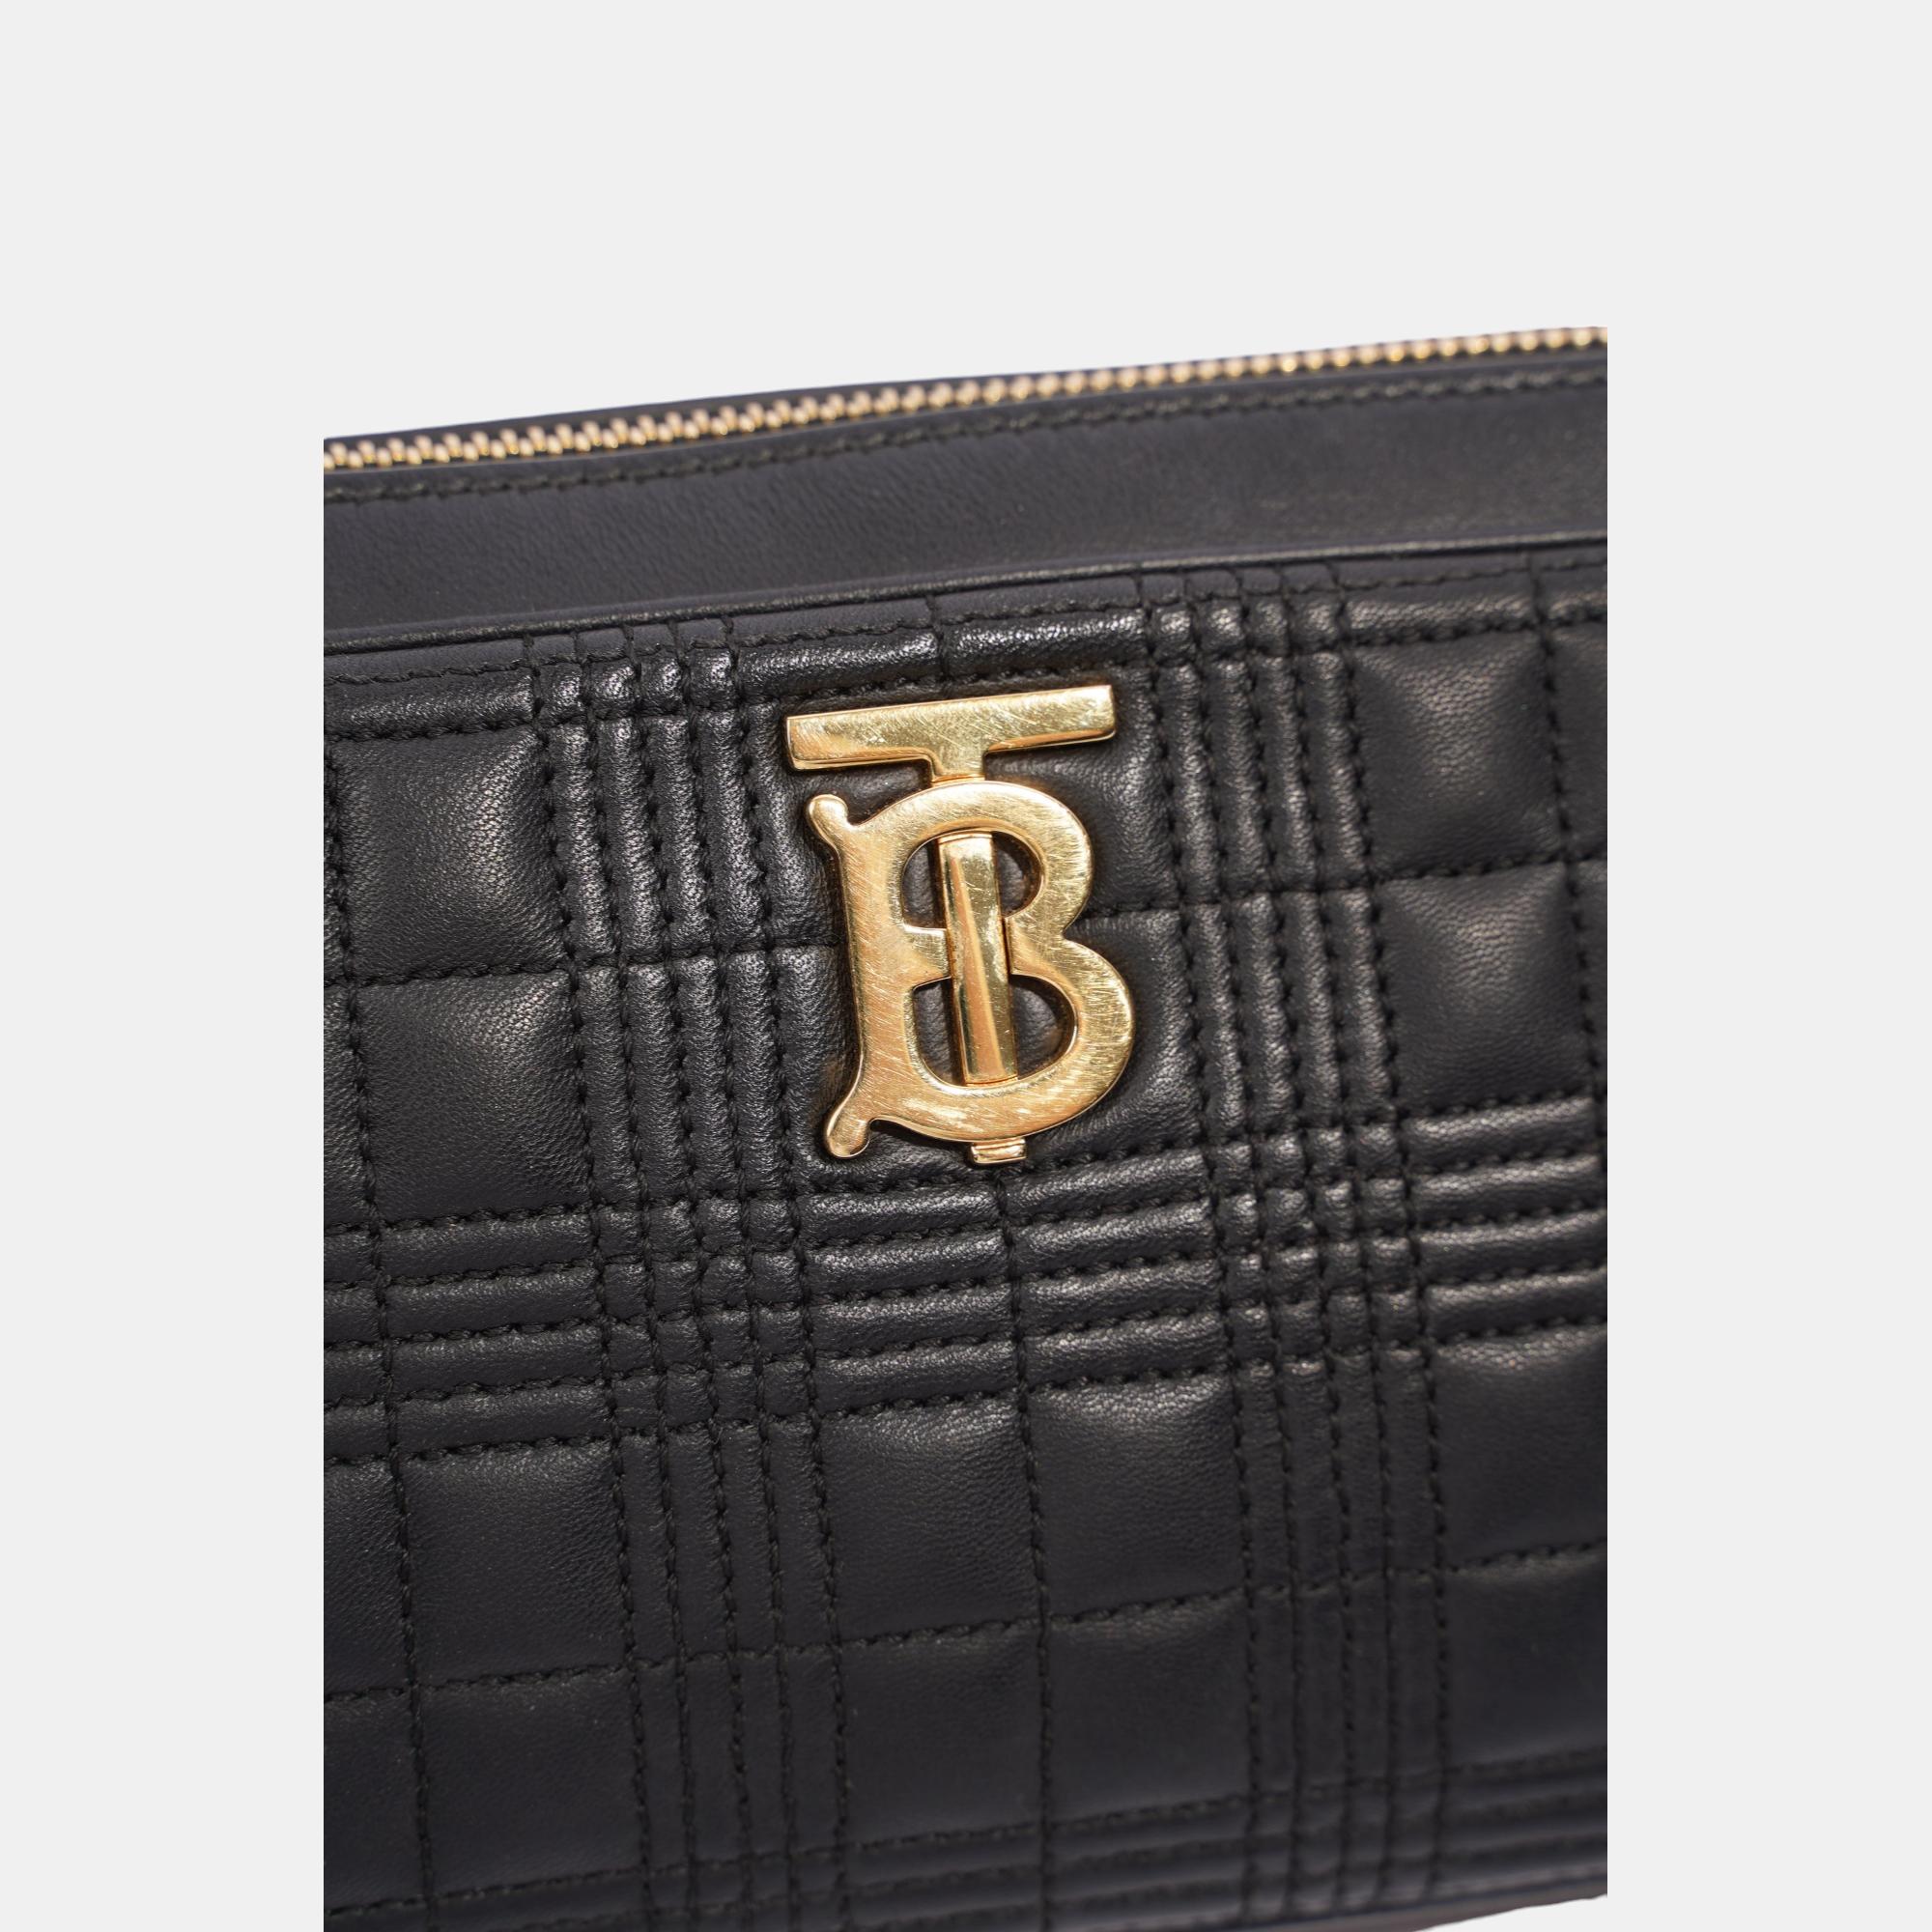 Burberry Chain Camera Quilted Bag Black Leather